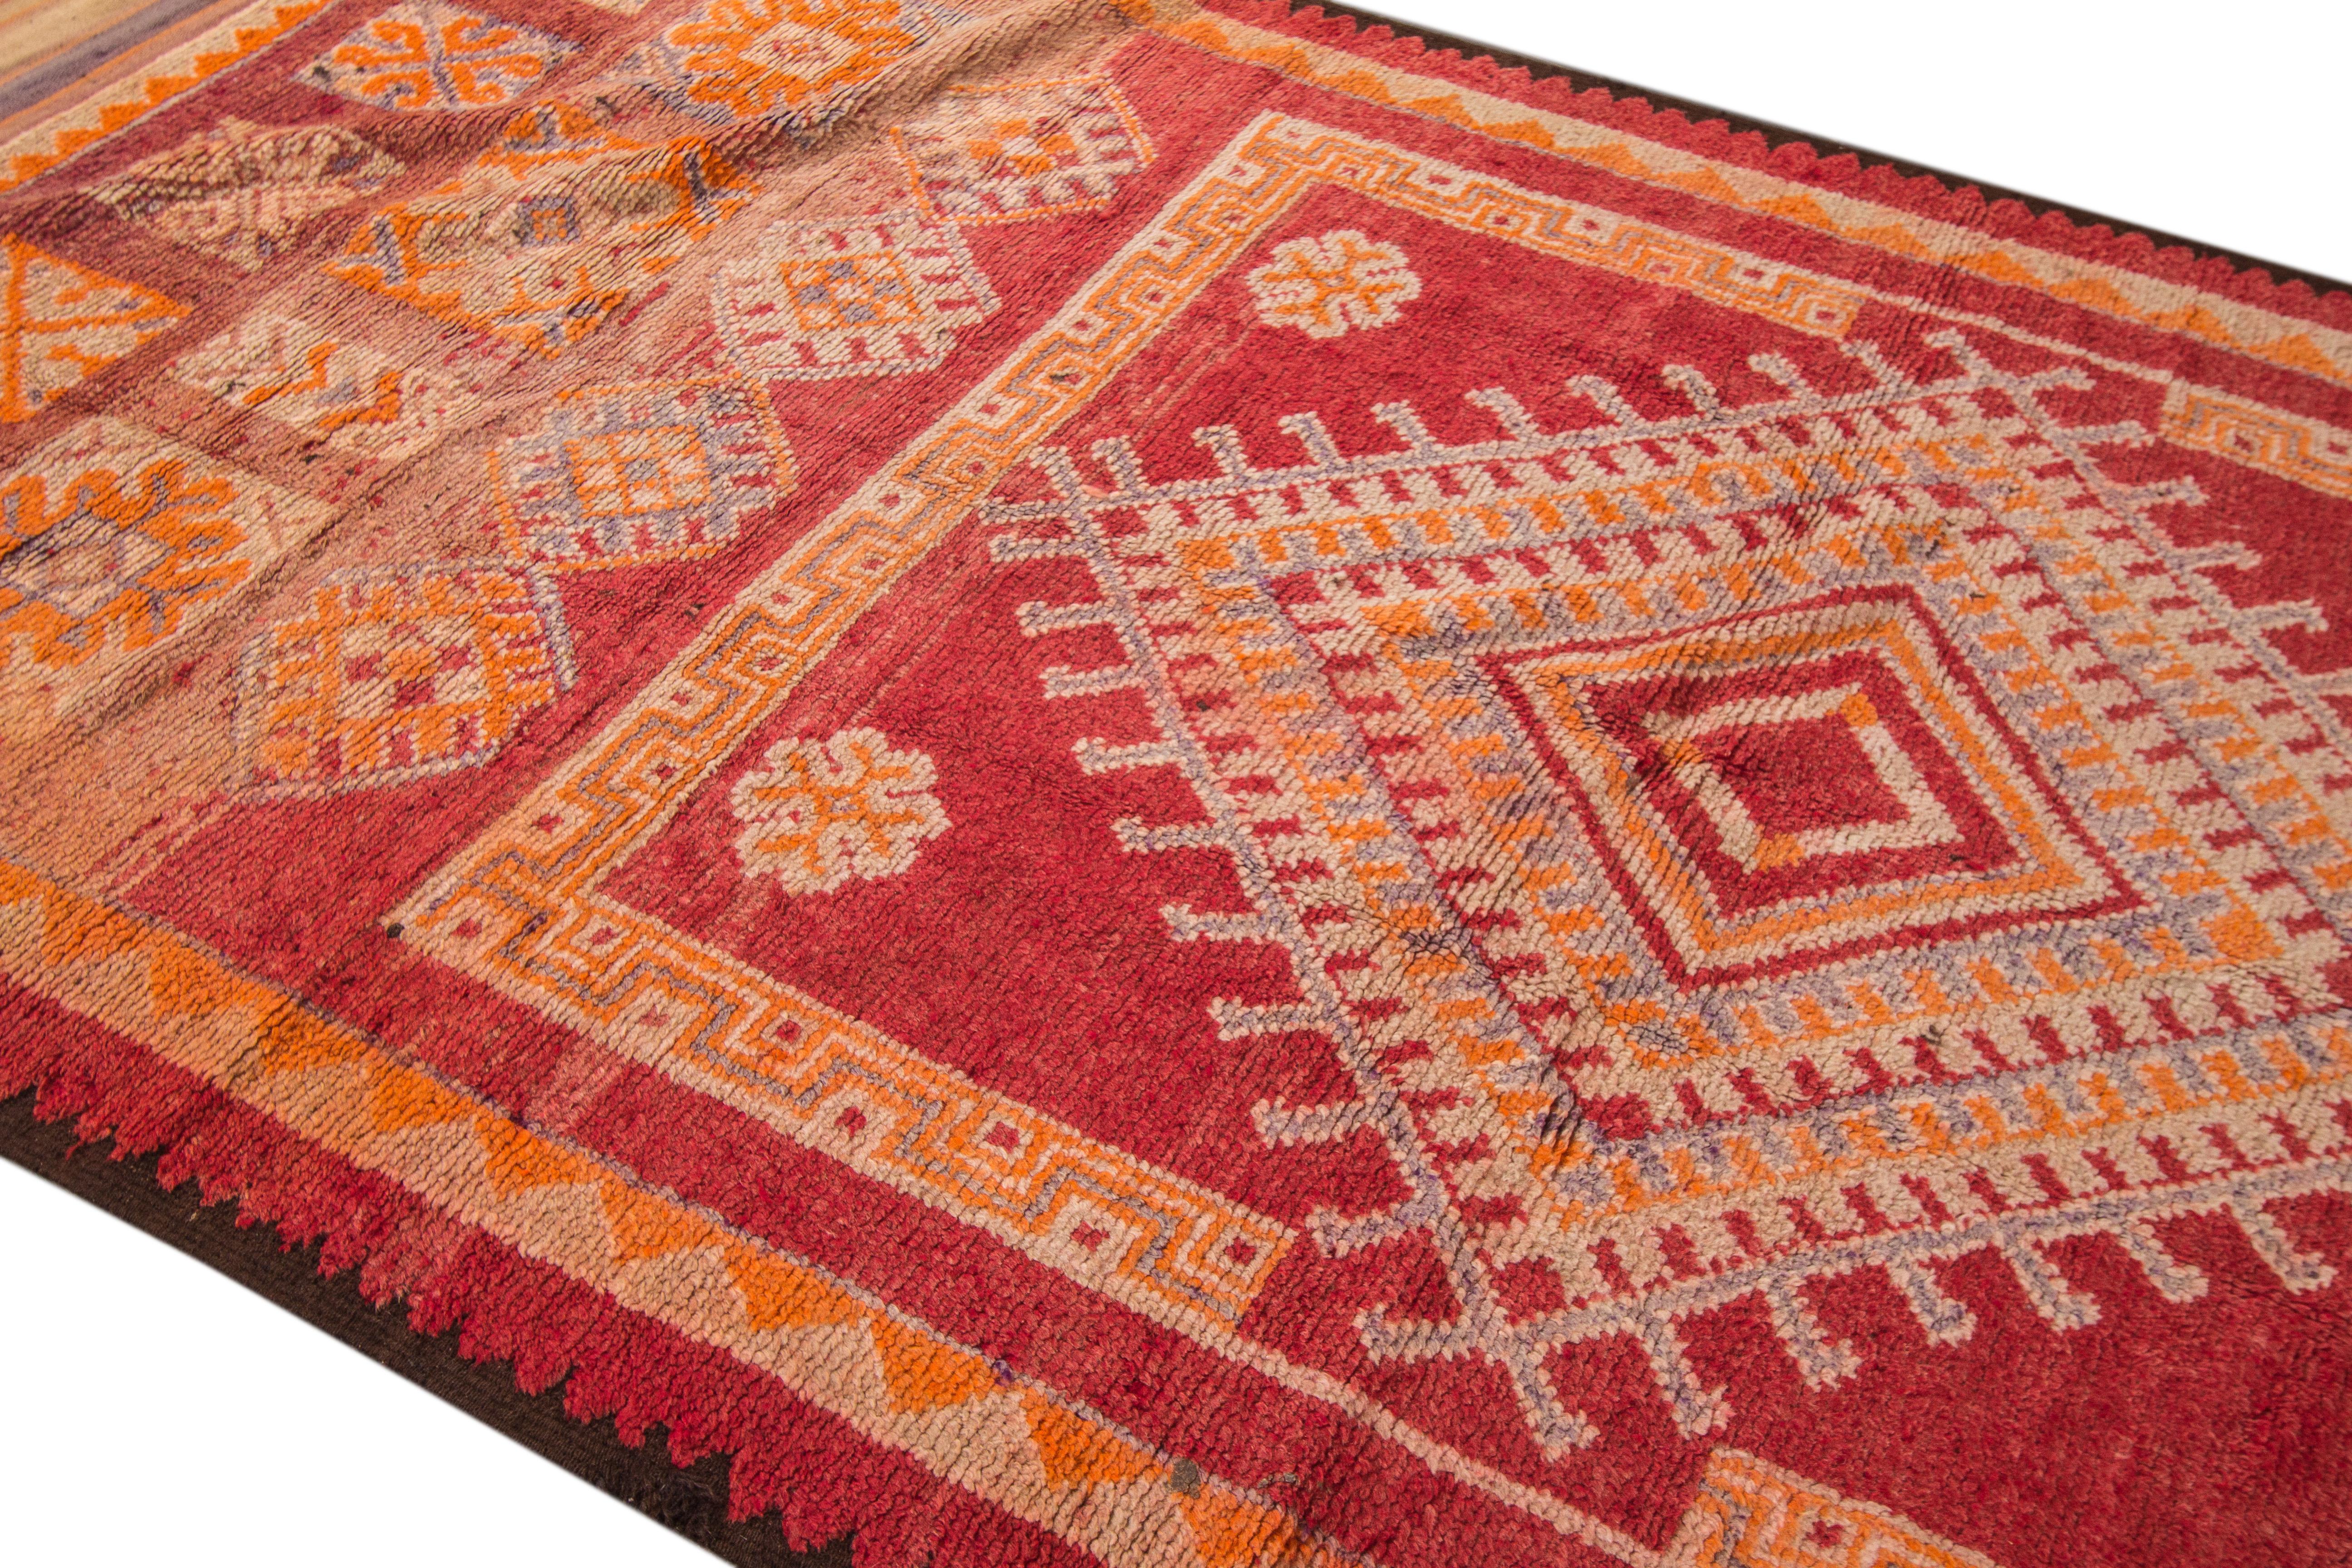 Hand-Knotted Vintage 1940s Red and Orange Moroccan Rug, 5.10x13.02 For Sale